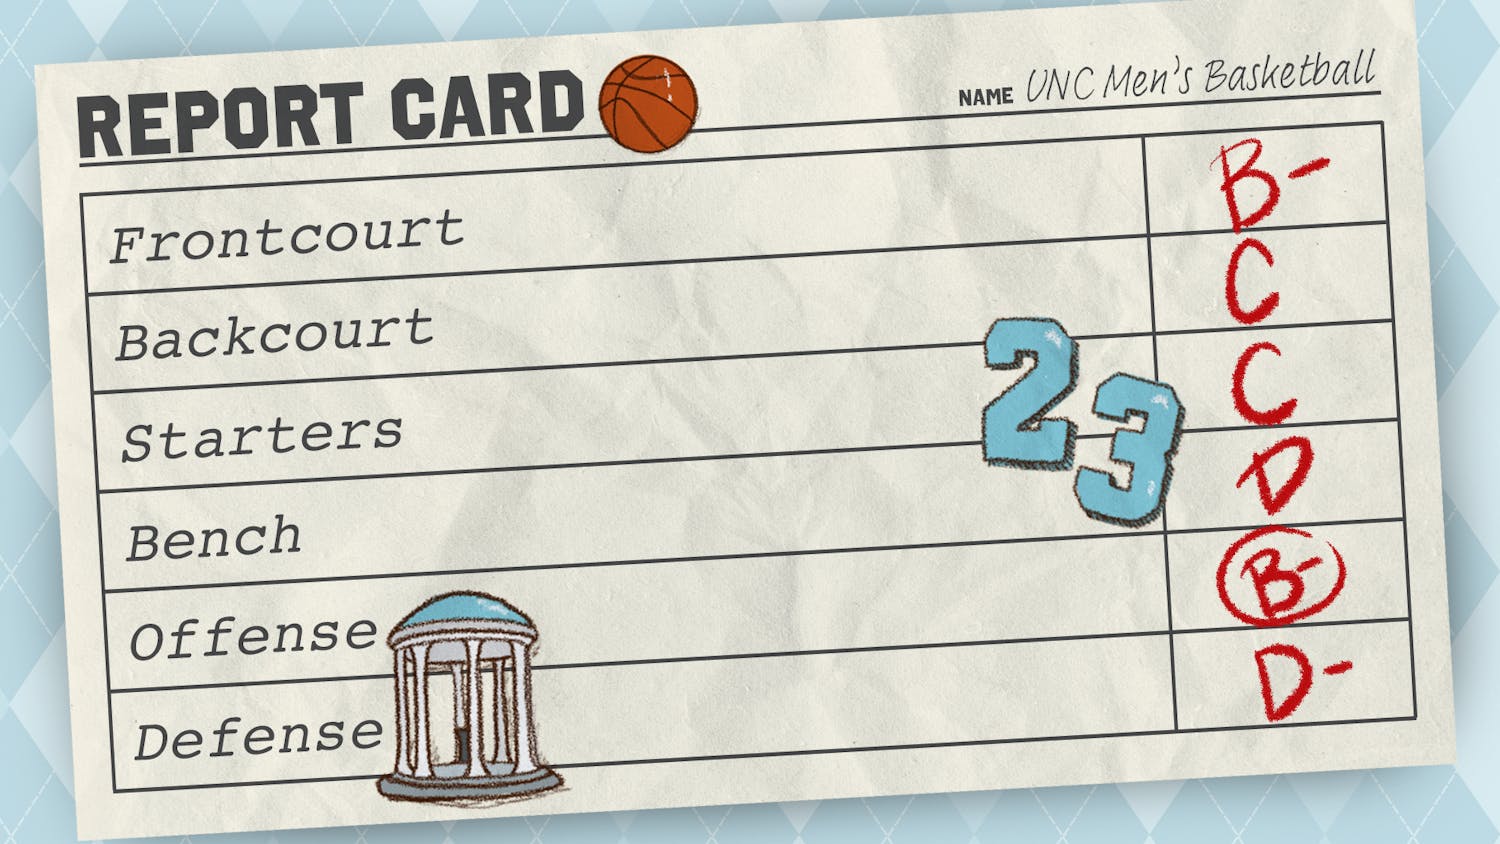 dth-reportcard-mensbball.png